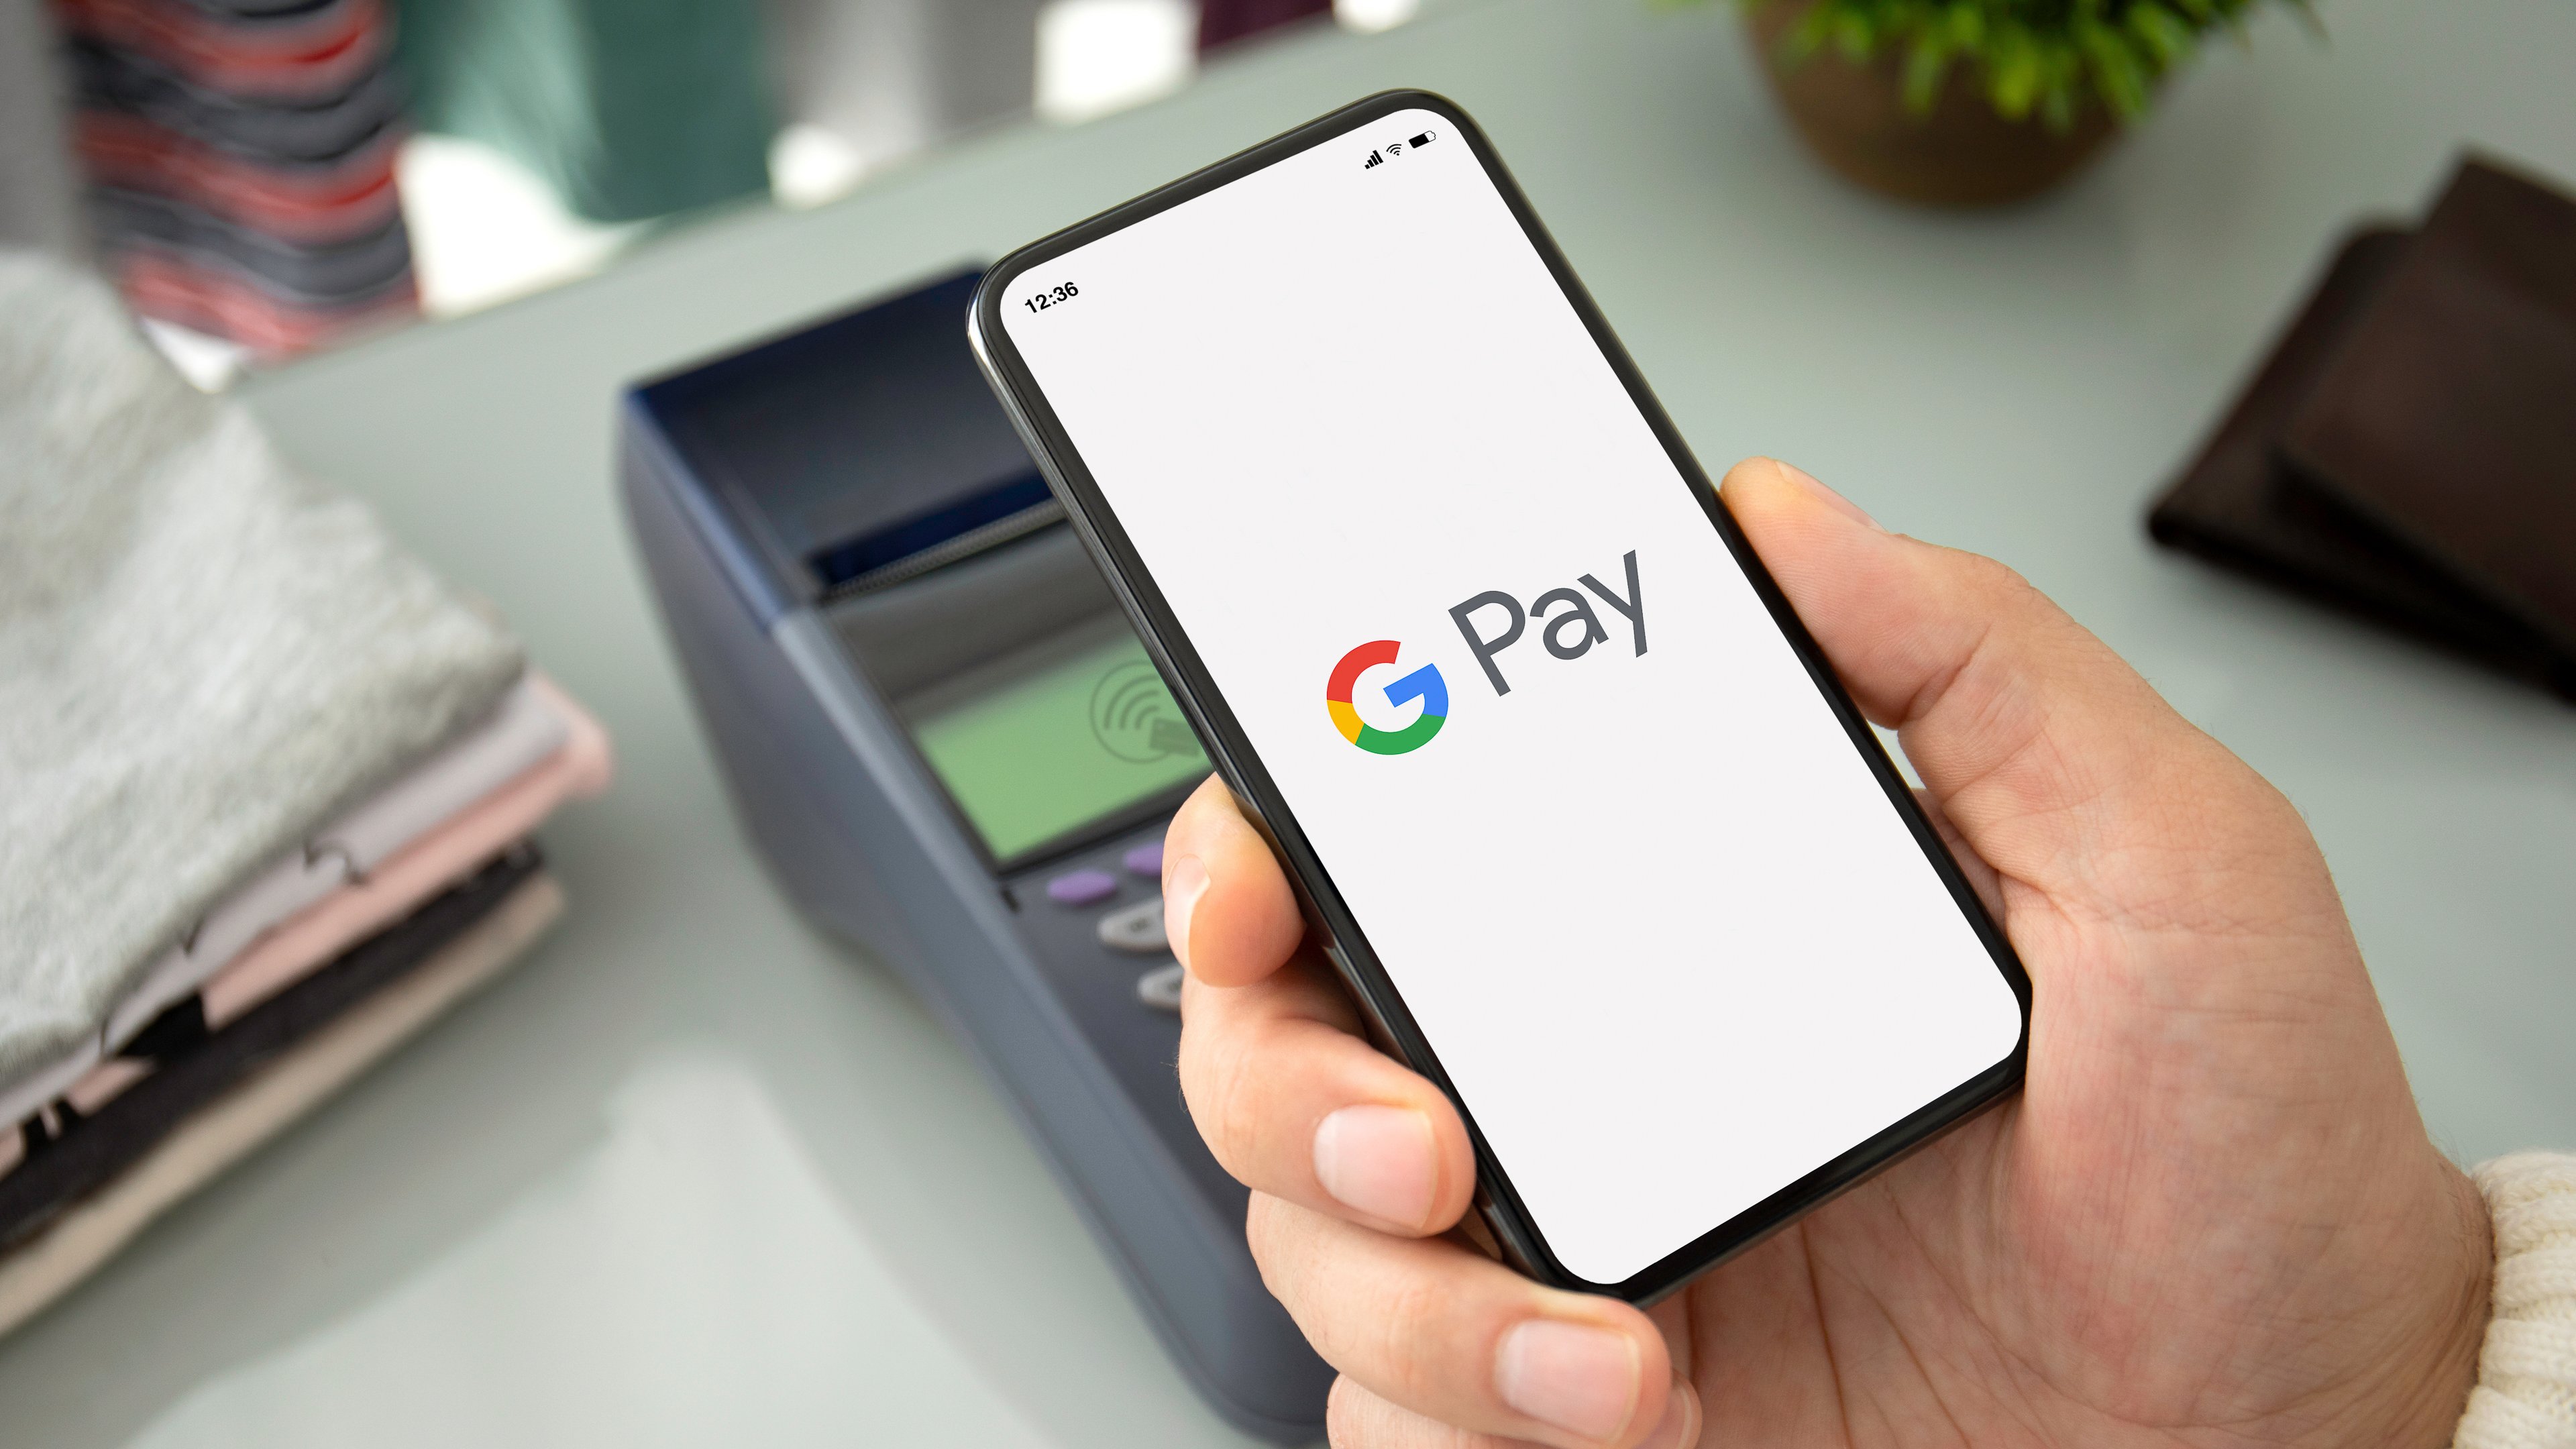 Google Pay gets relaunch: here's what changes for you | NextPit